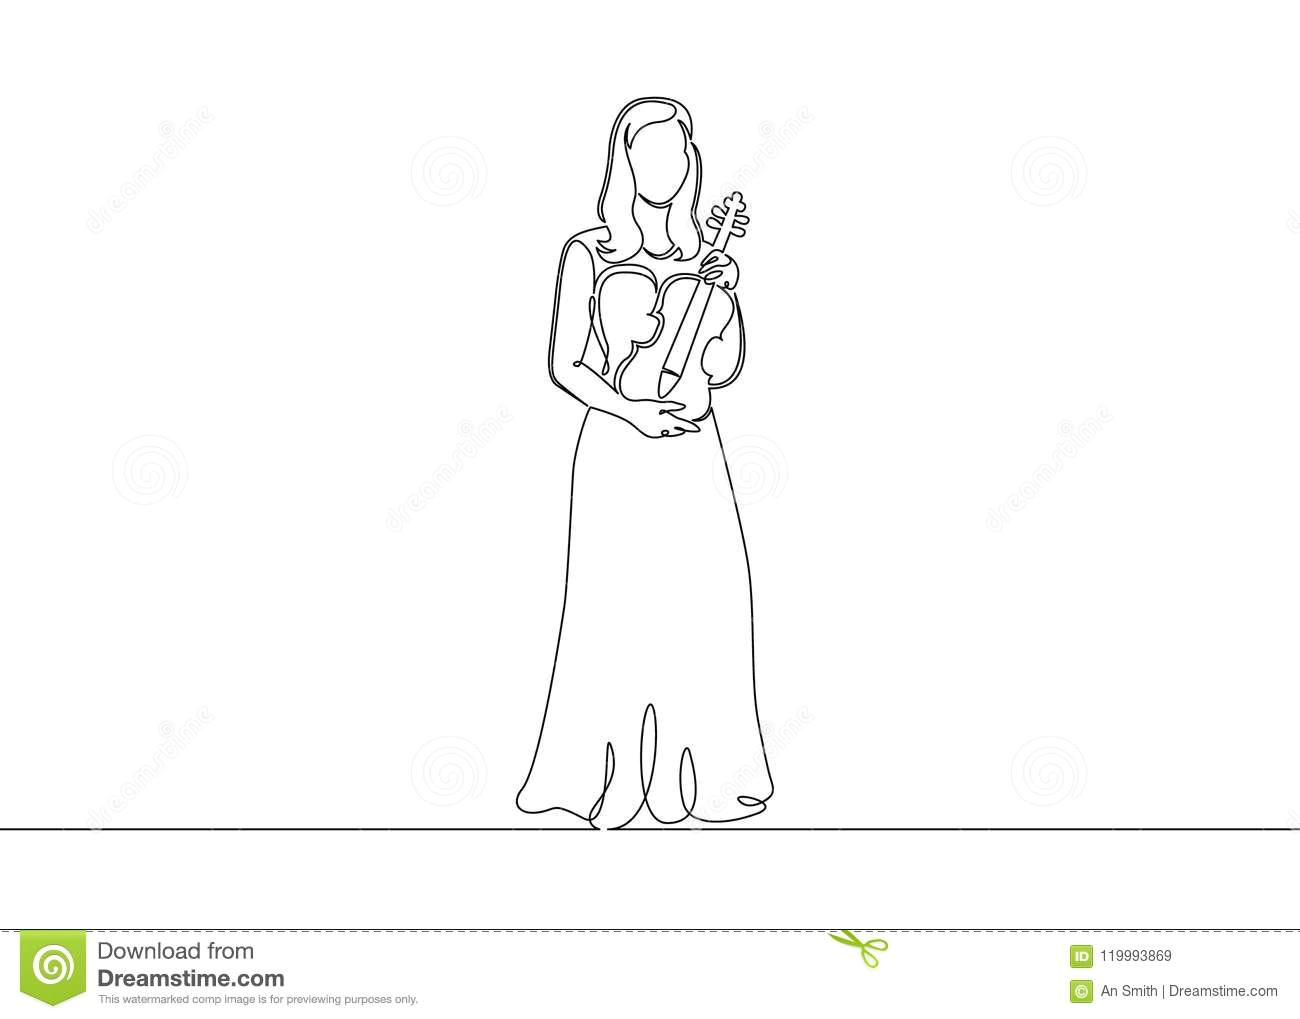 Cartoon Violin Drawing A Continuous One Drawn Single Line Of A Musician is Played by A